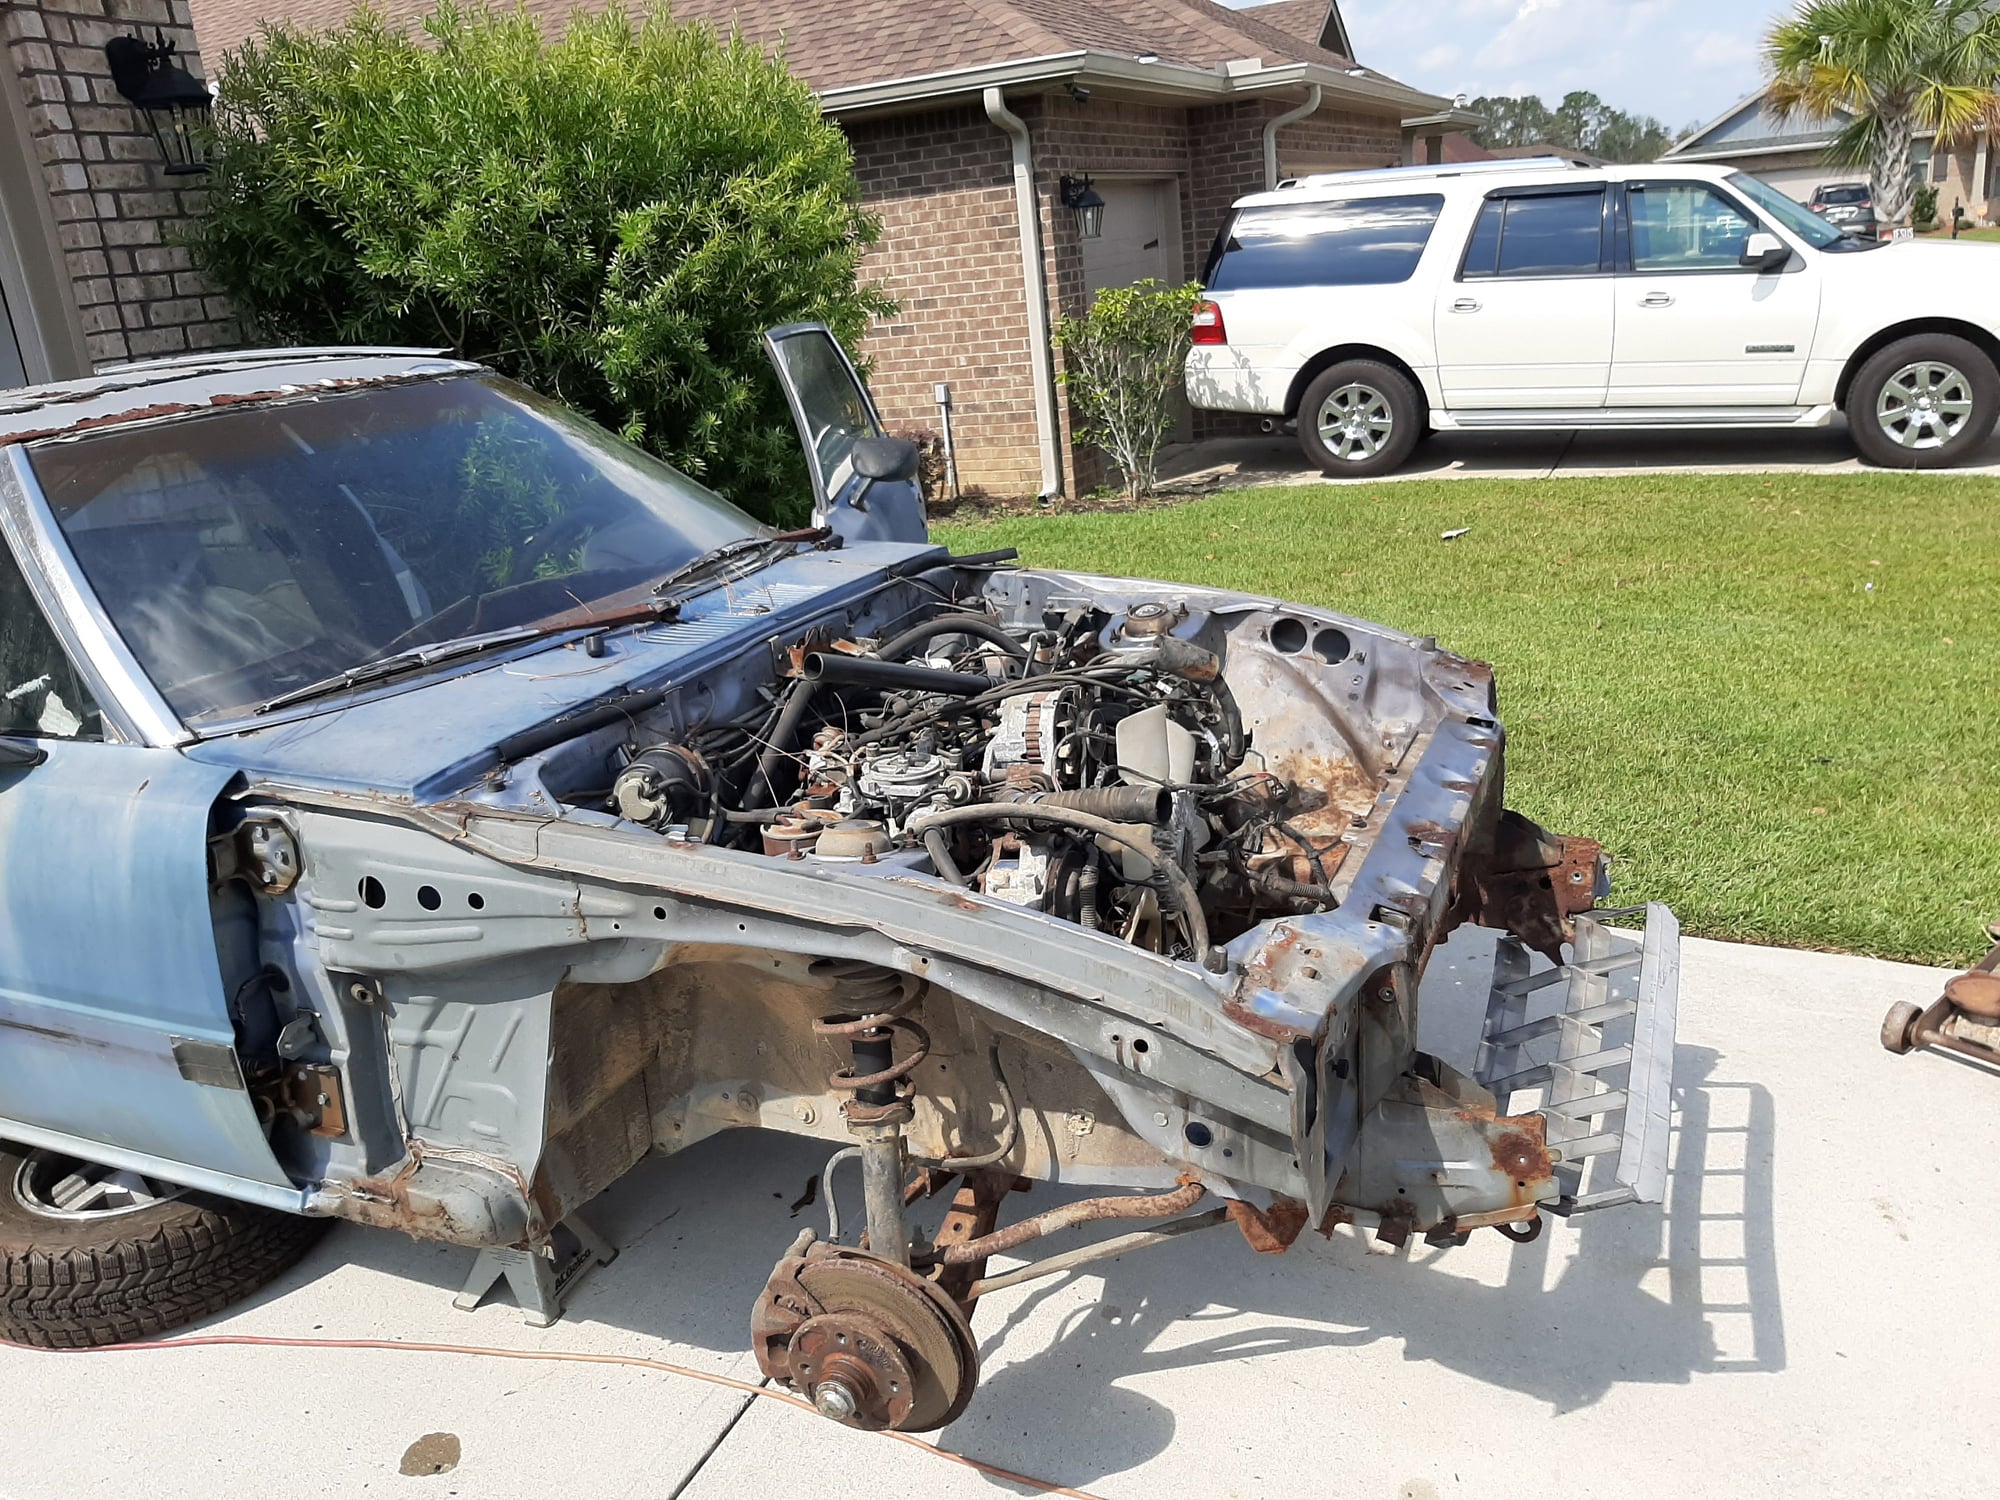 1983 Mazda RX-7 - Parting out a 1983 RX-7 - Pensacola, FL 32526, United States